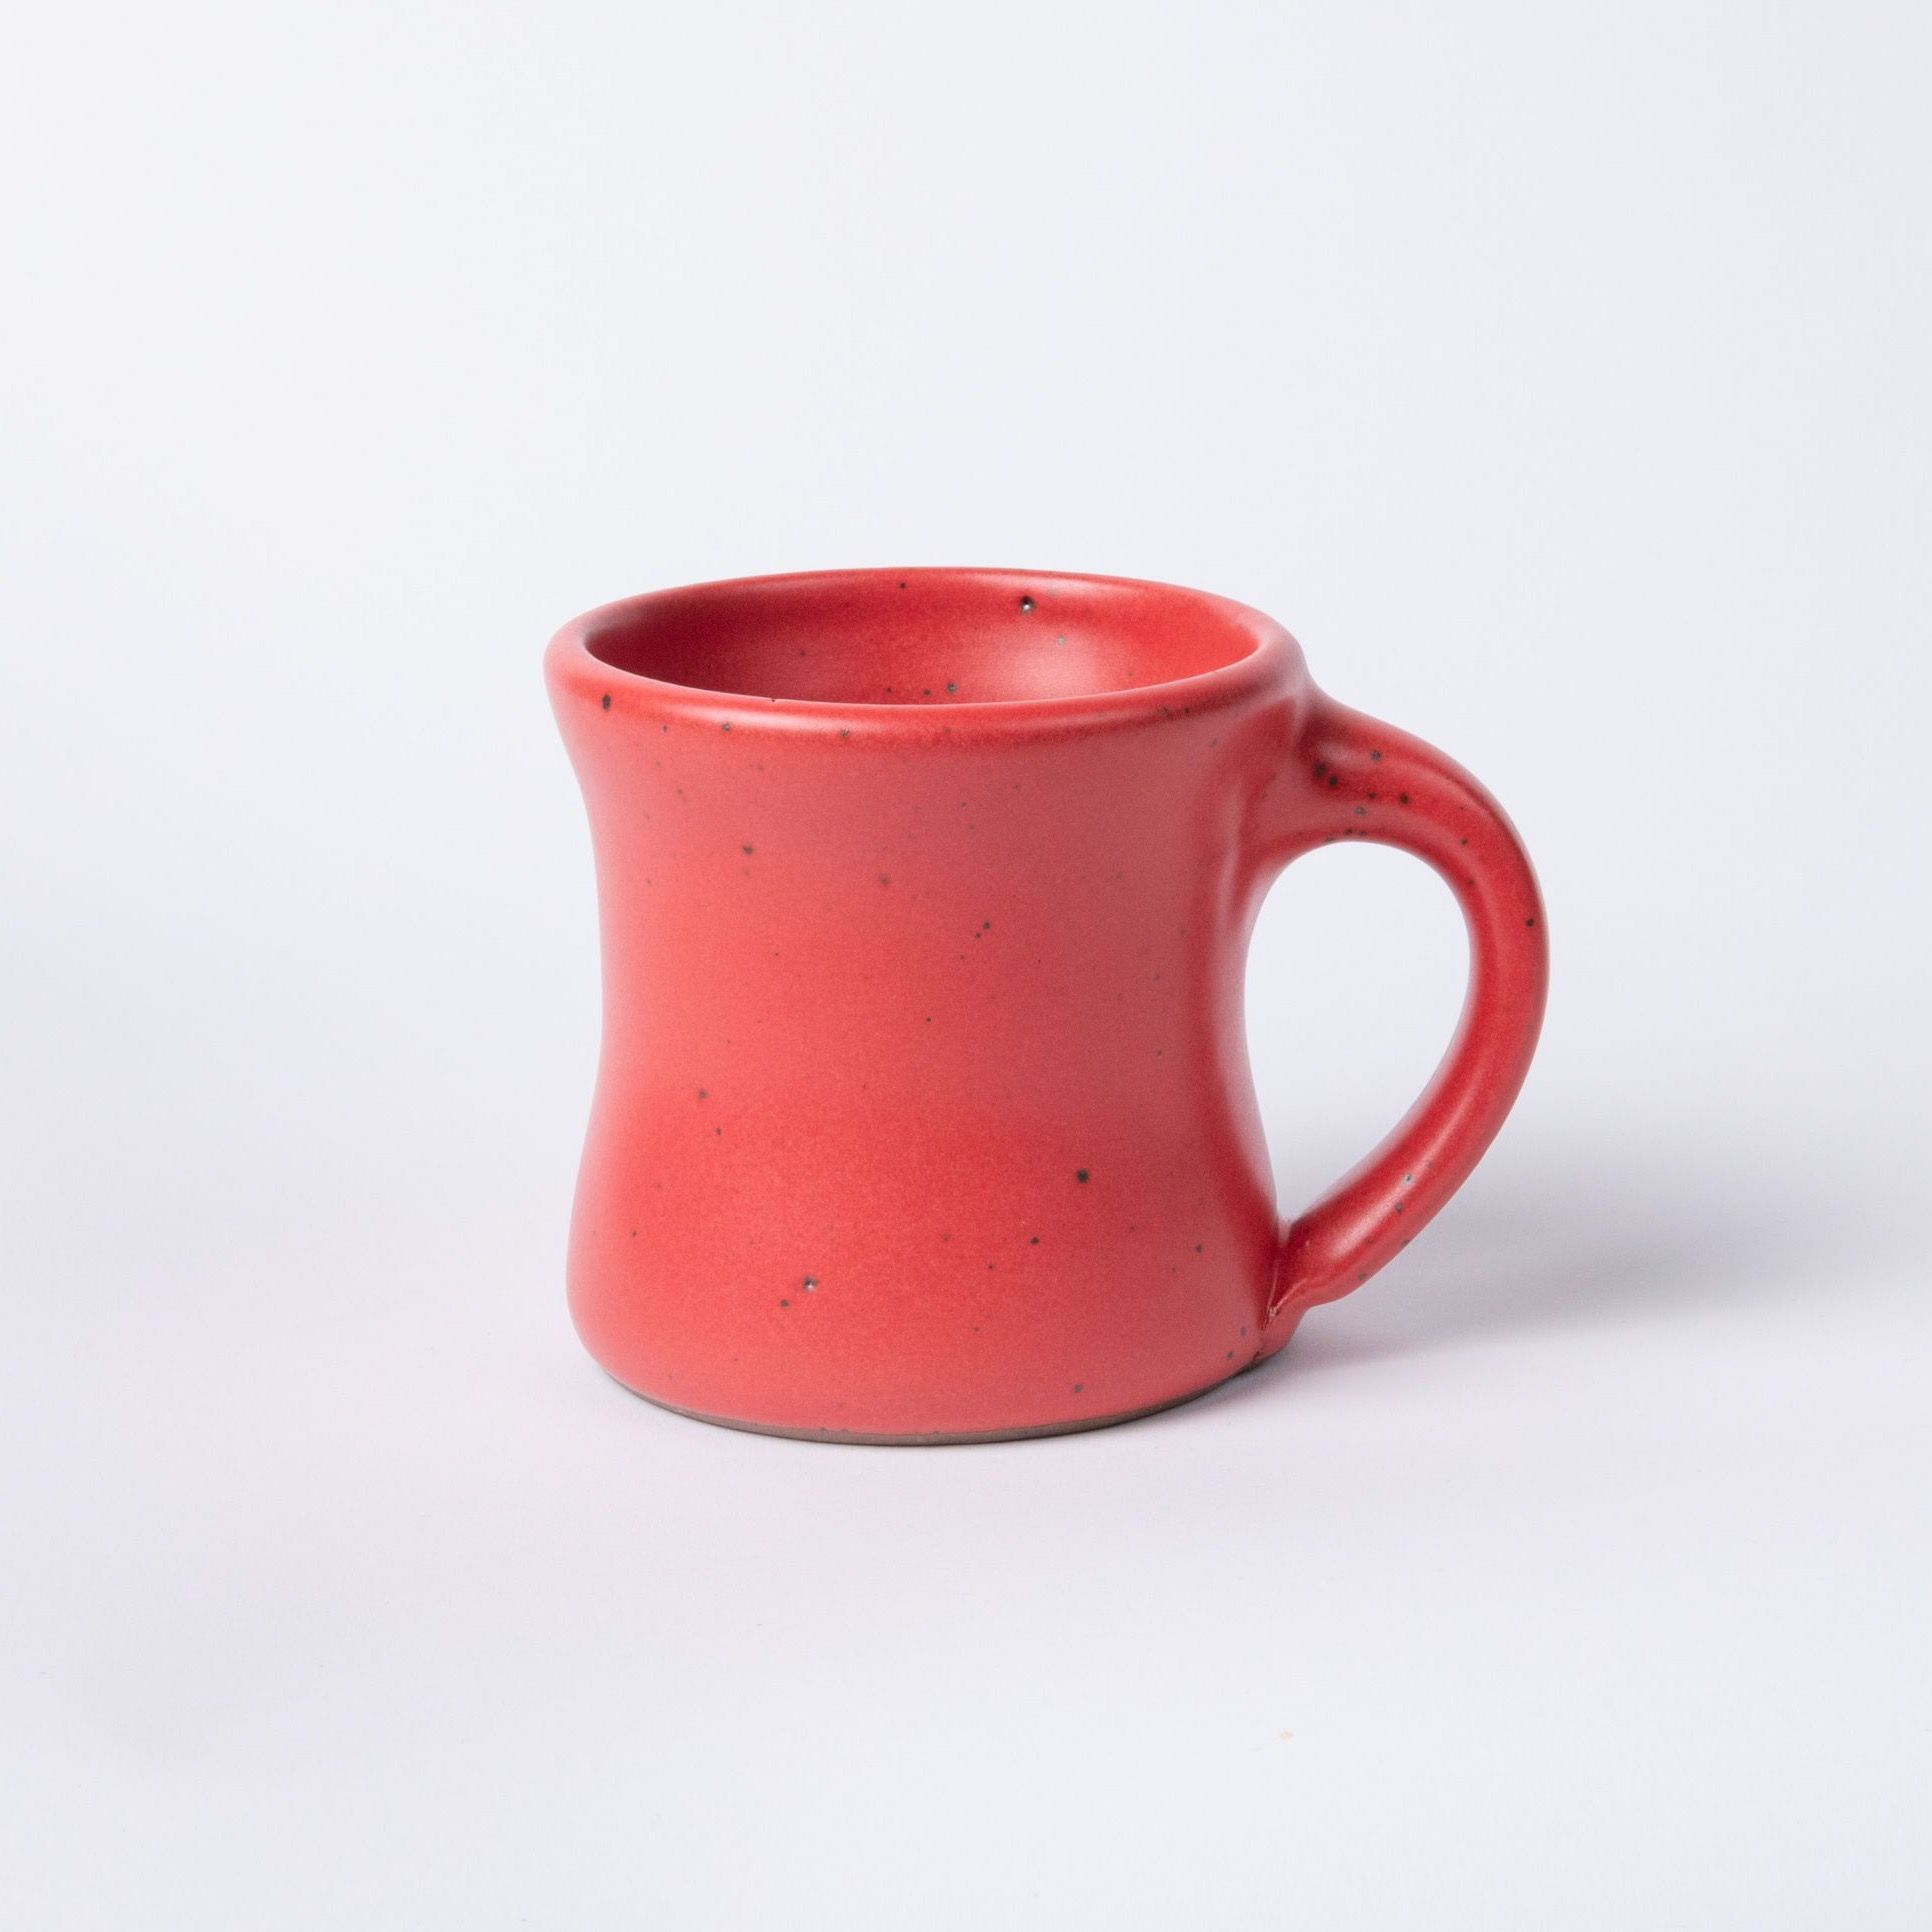 A classic diner mug that tapers out on the top and bottom in a bold red color featuring iron speckles and a handle.